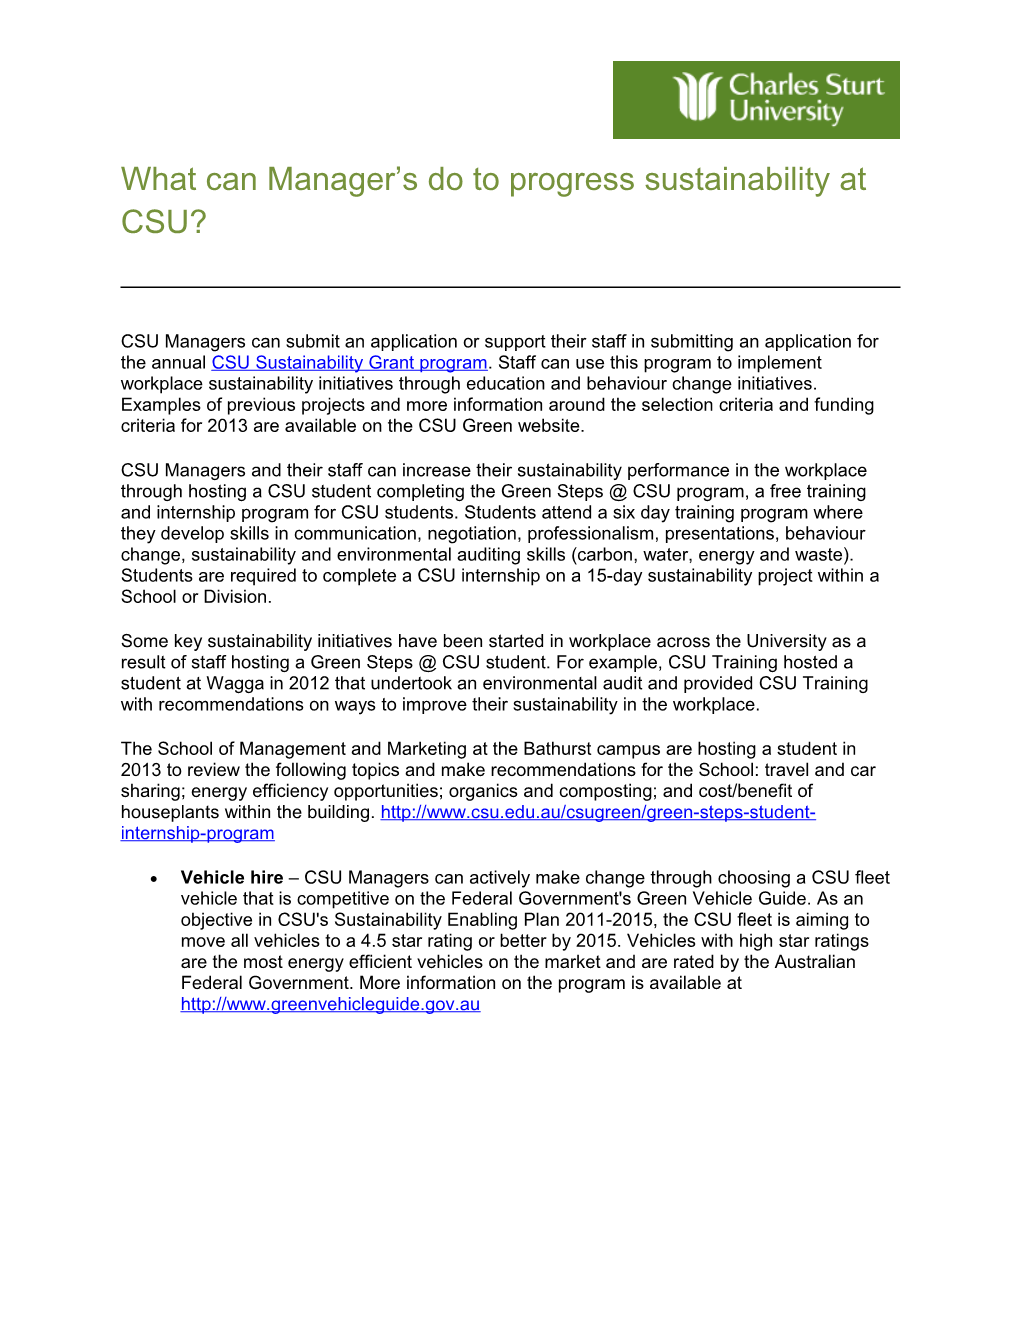 What Can Manager S Do to Progress Sustainability at CSU?